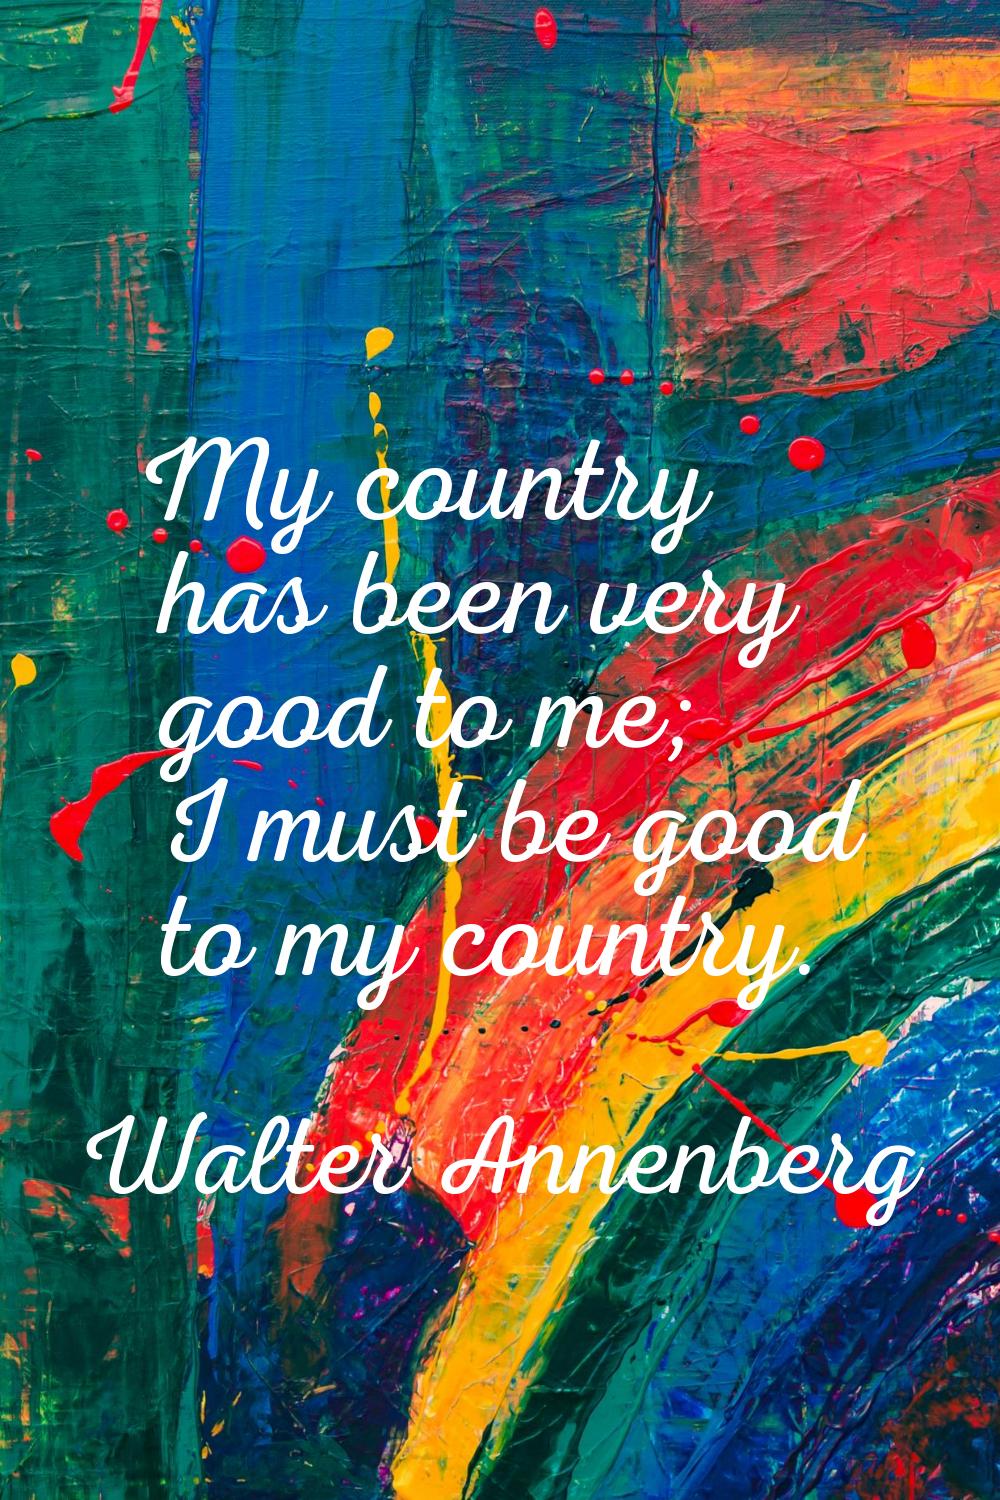 My country has been very good to me; I must be good to my country.